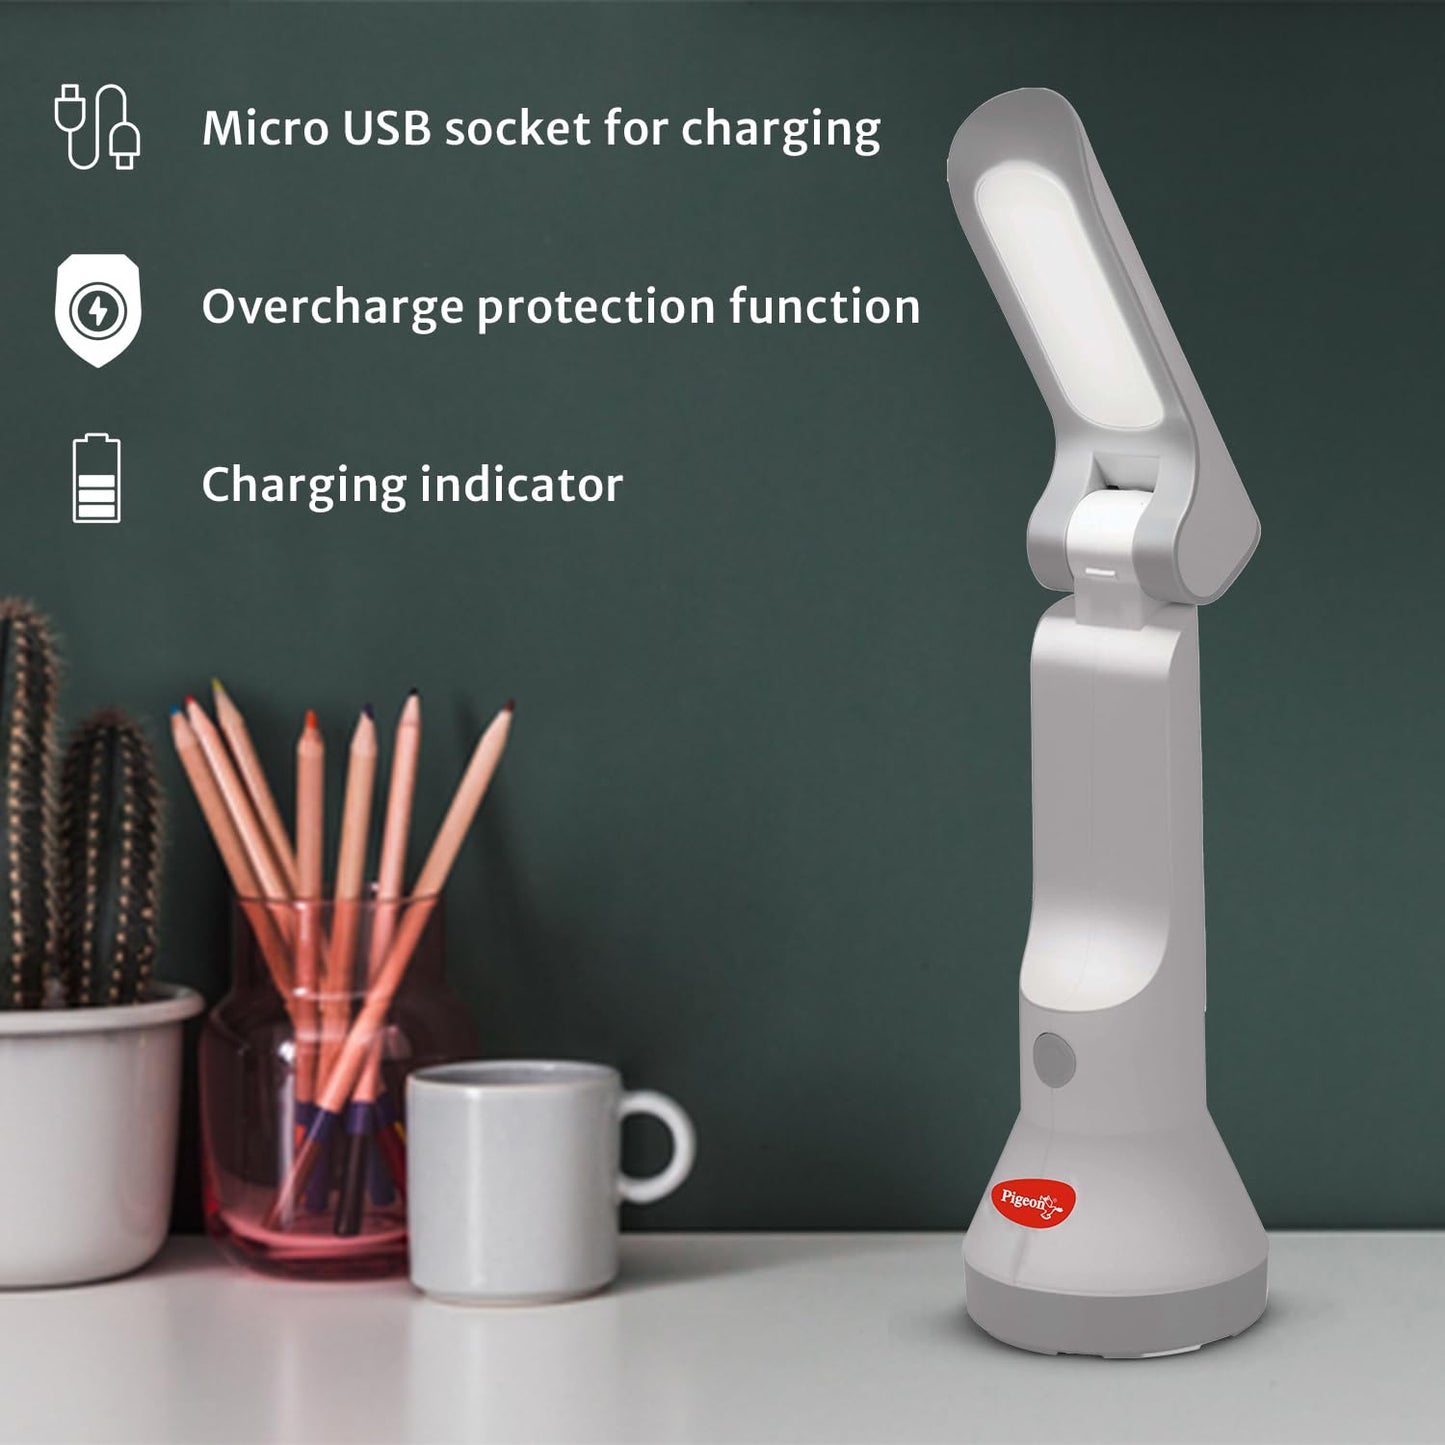 Pigeon Shine 2 in 1 Desk and Torch Emergency Lamp with 1200 mAh and 8 Hours Backup - 14188